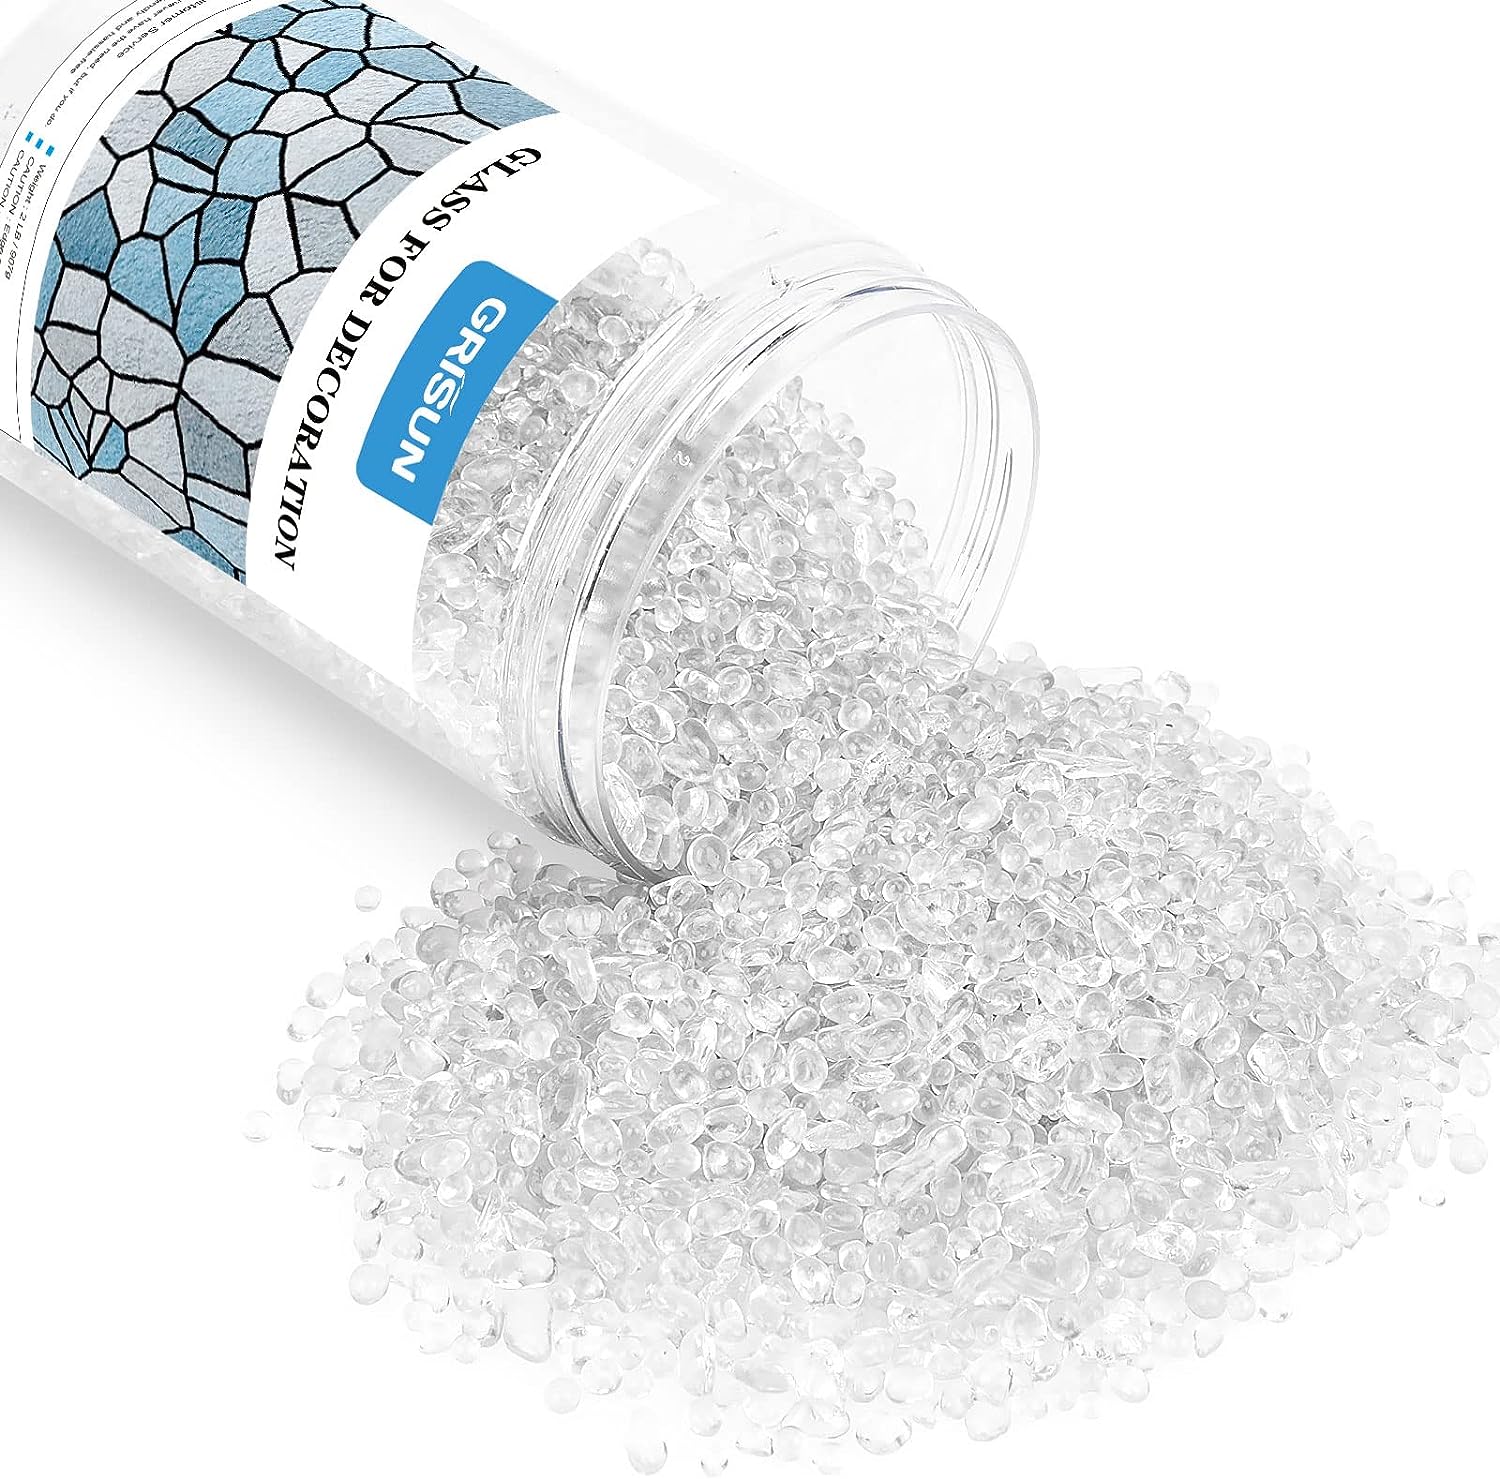 GRISUN Silver Crushed Glass for Crafts, 2 Pounds Jar 3-6mm Reflective  Tempered Glass Gravel Stone, Broken Glass, Fire Gems Chips for Crafts Resin